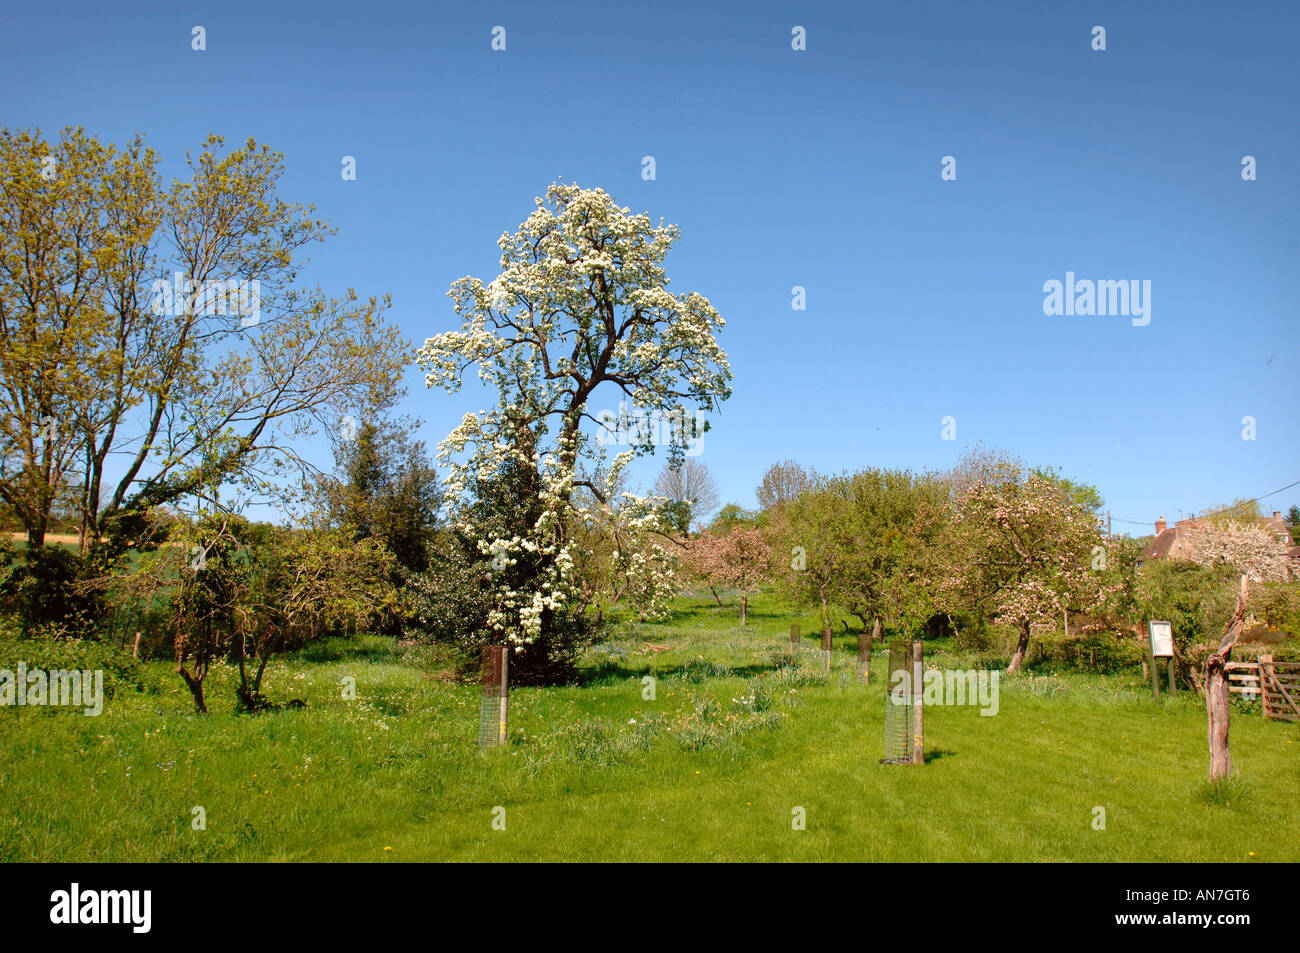 A MATURE BARLAND PERRY PEAR TREE IN FULL BLOSSOM Stock Photo